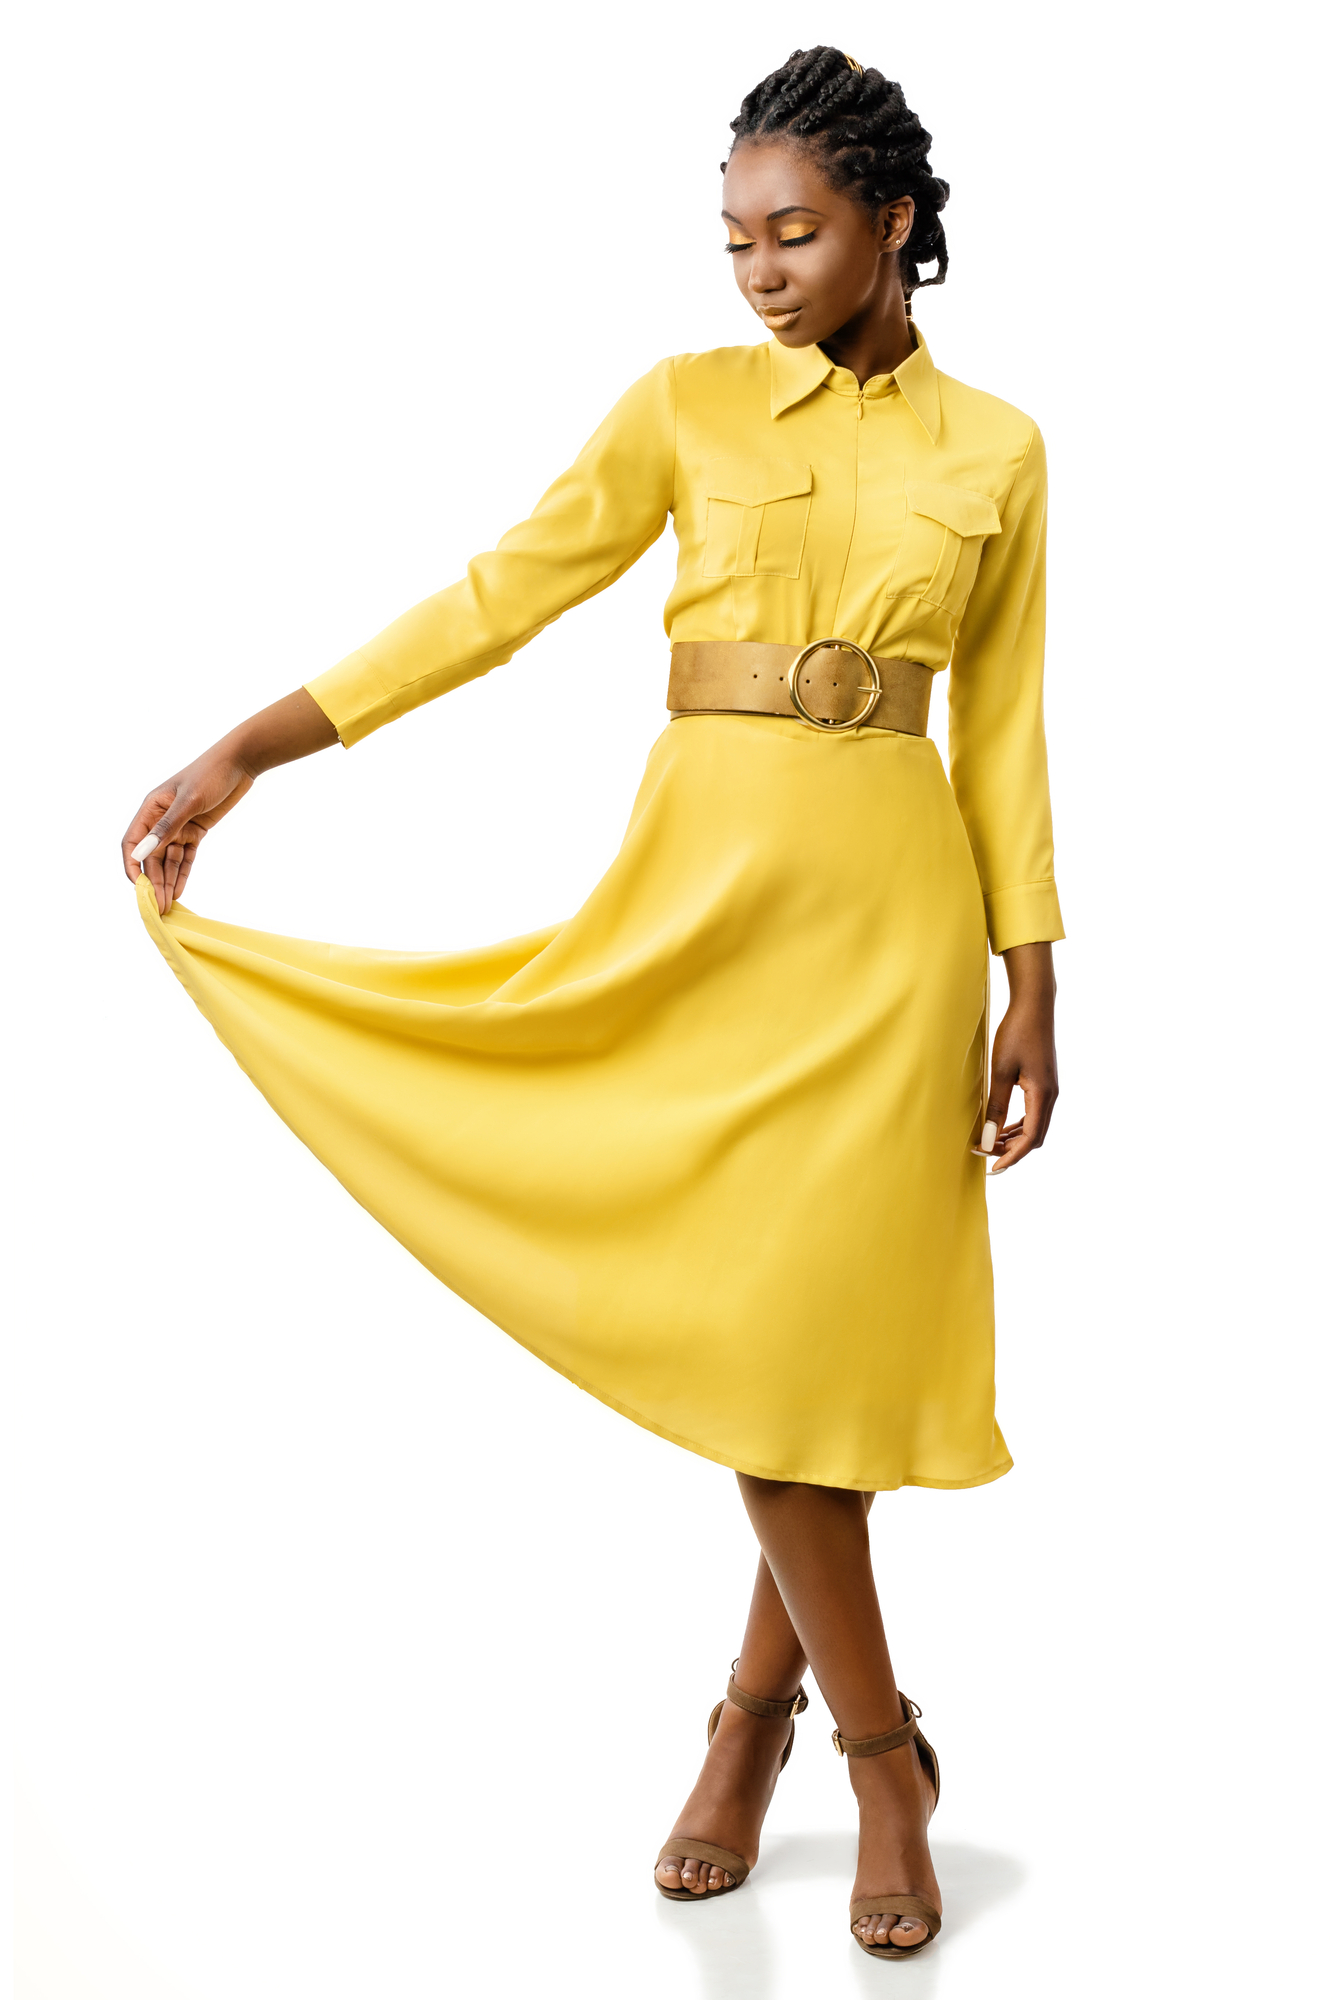 Full length portrait of attractive young african american girl in stylish yellow dress. Elegant woman holding end of dress with eyes closed.Isolated on white background.